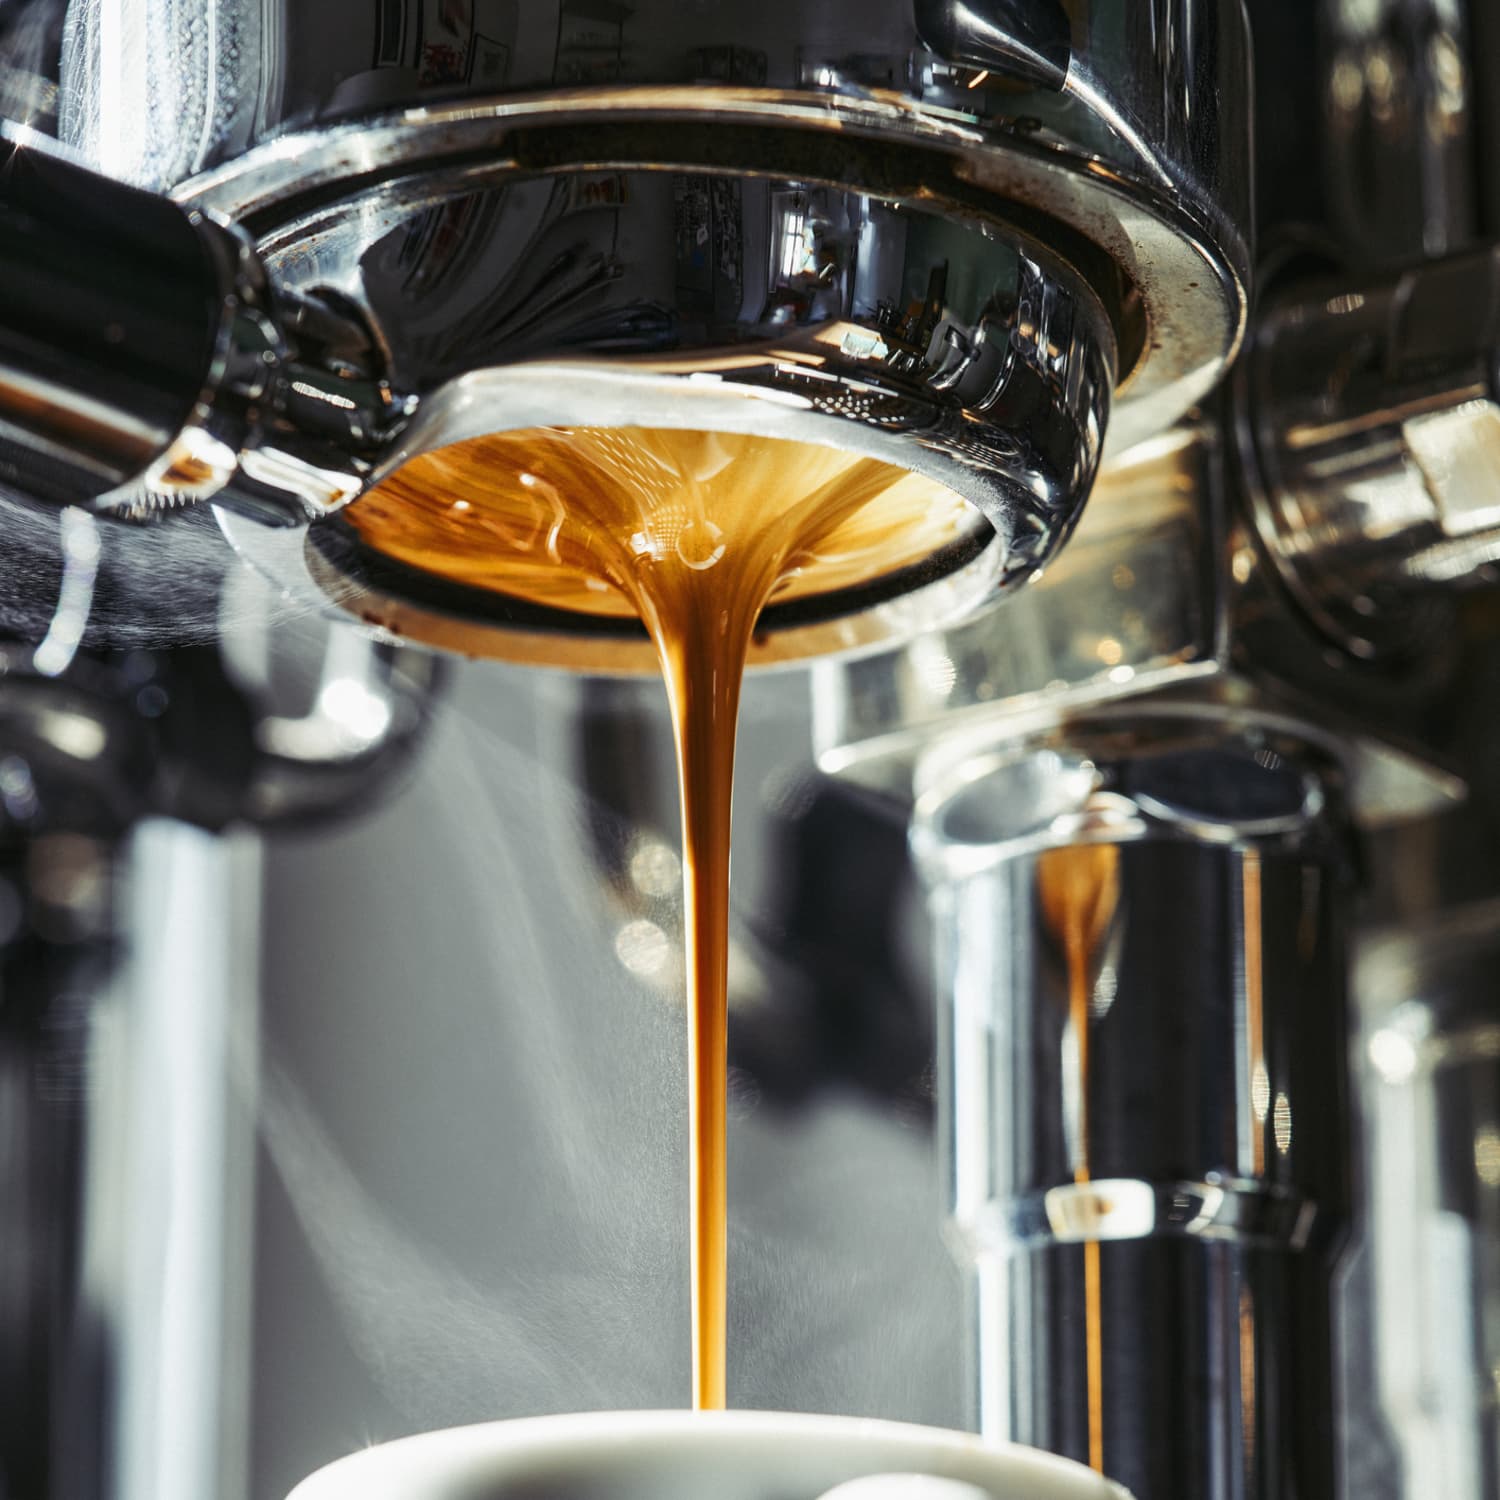 CoffeeGeek » The worlds most read coffee and espresso resource